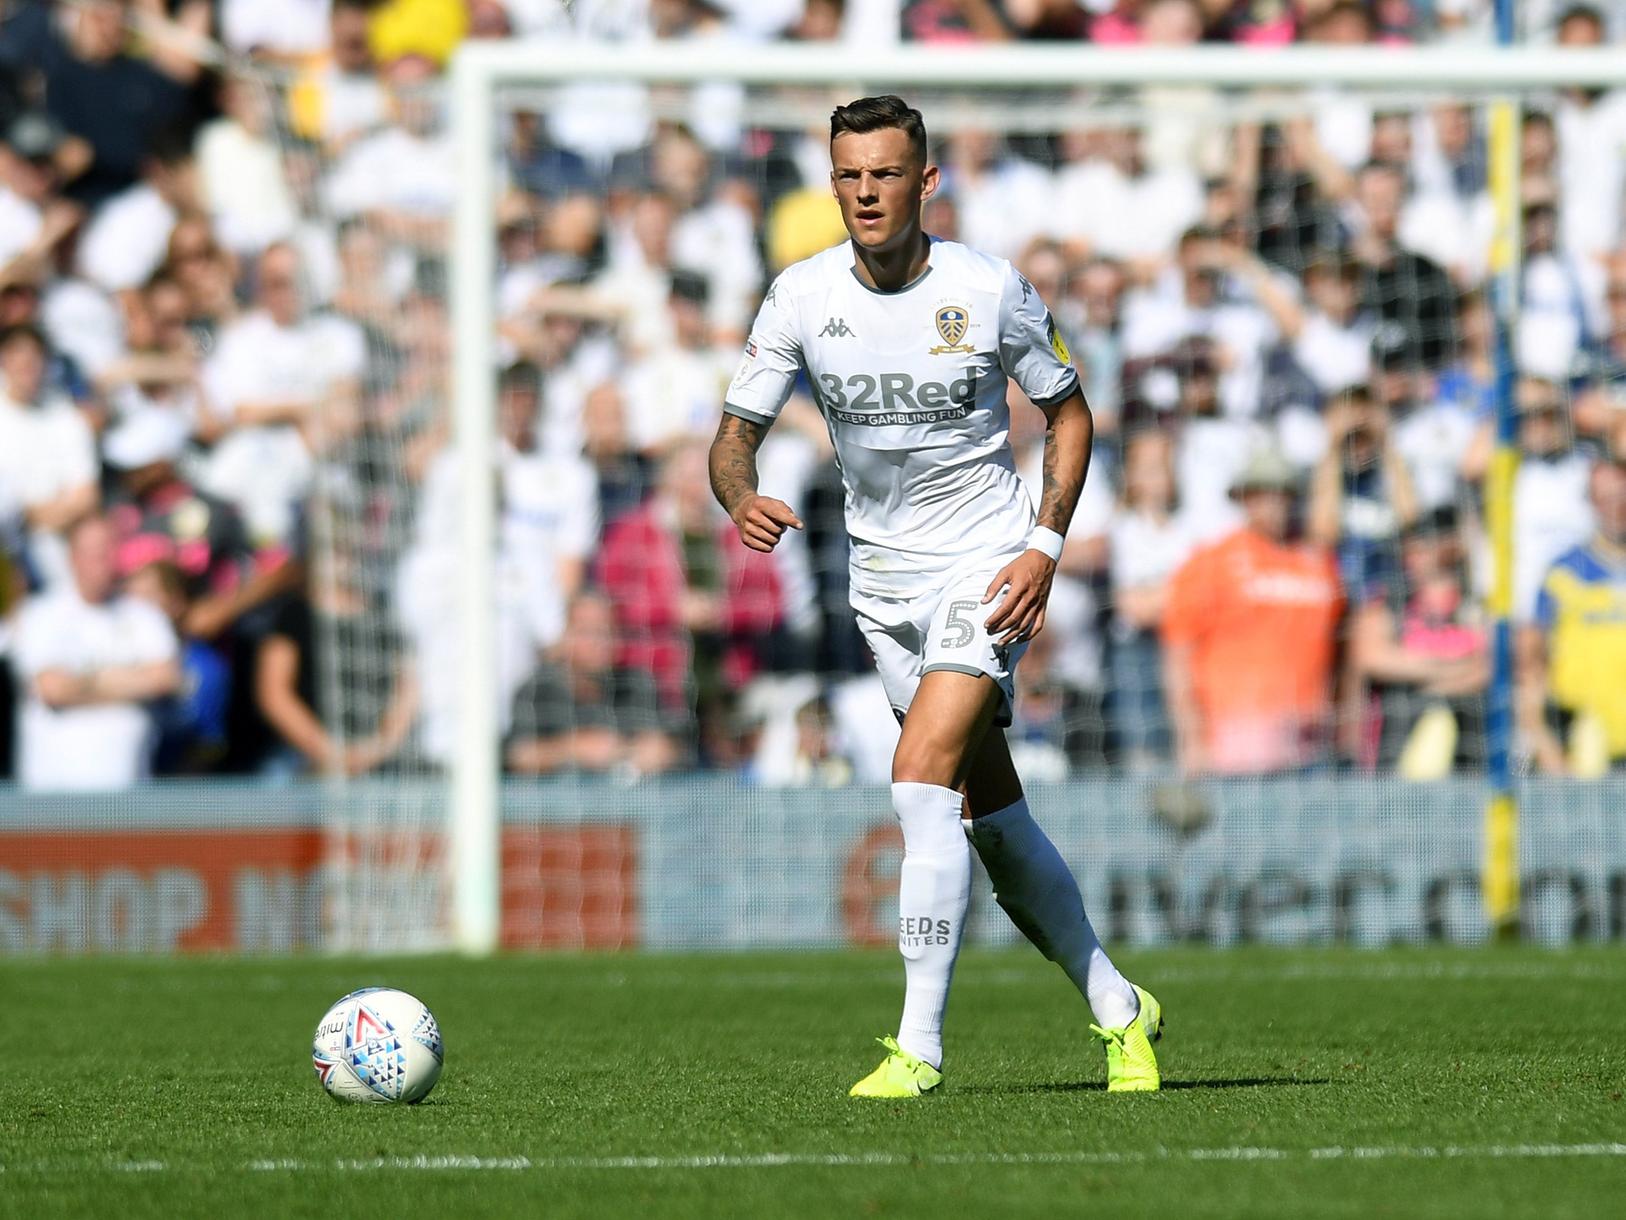 Has formed a strong partnership with Liam Cooper and looks sure to start again at centre-back.